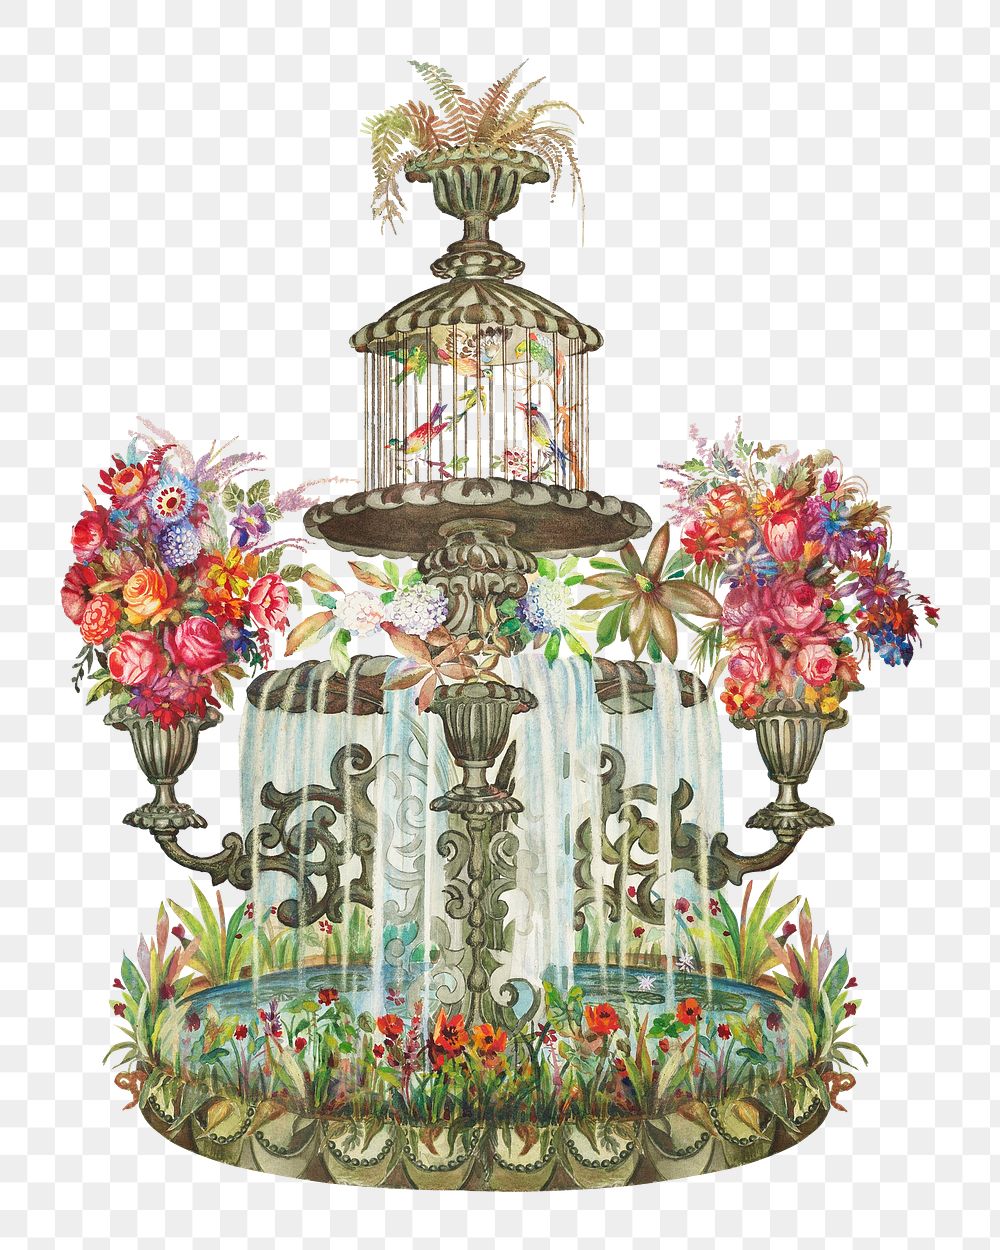 Conservatory Fountain png, vintage garden illustration by Perkins Harnly and Nicholas Zupa, transparent background. Remixed…